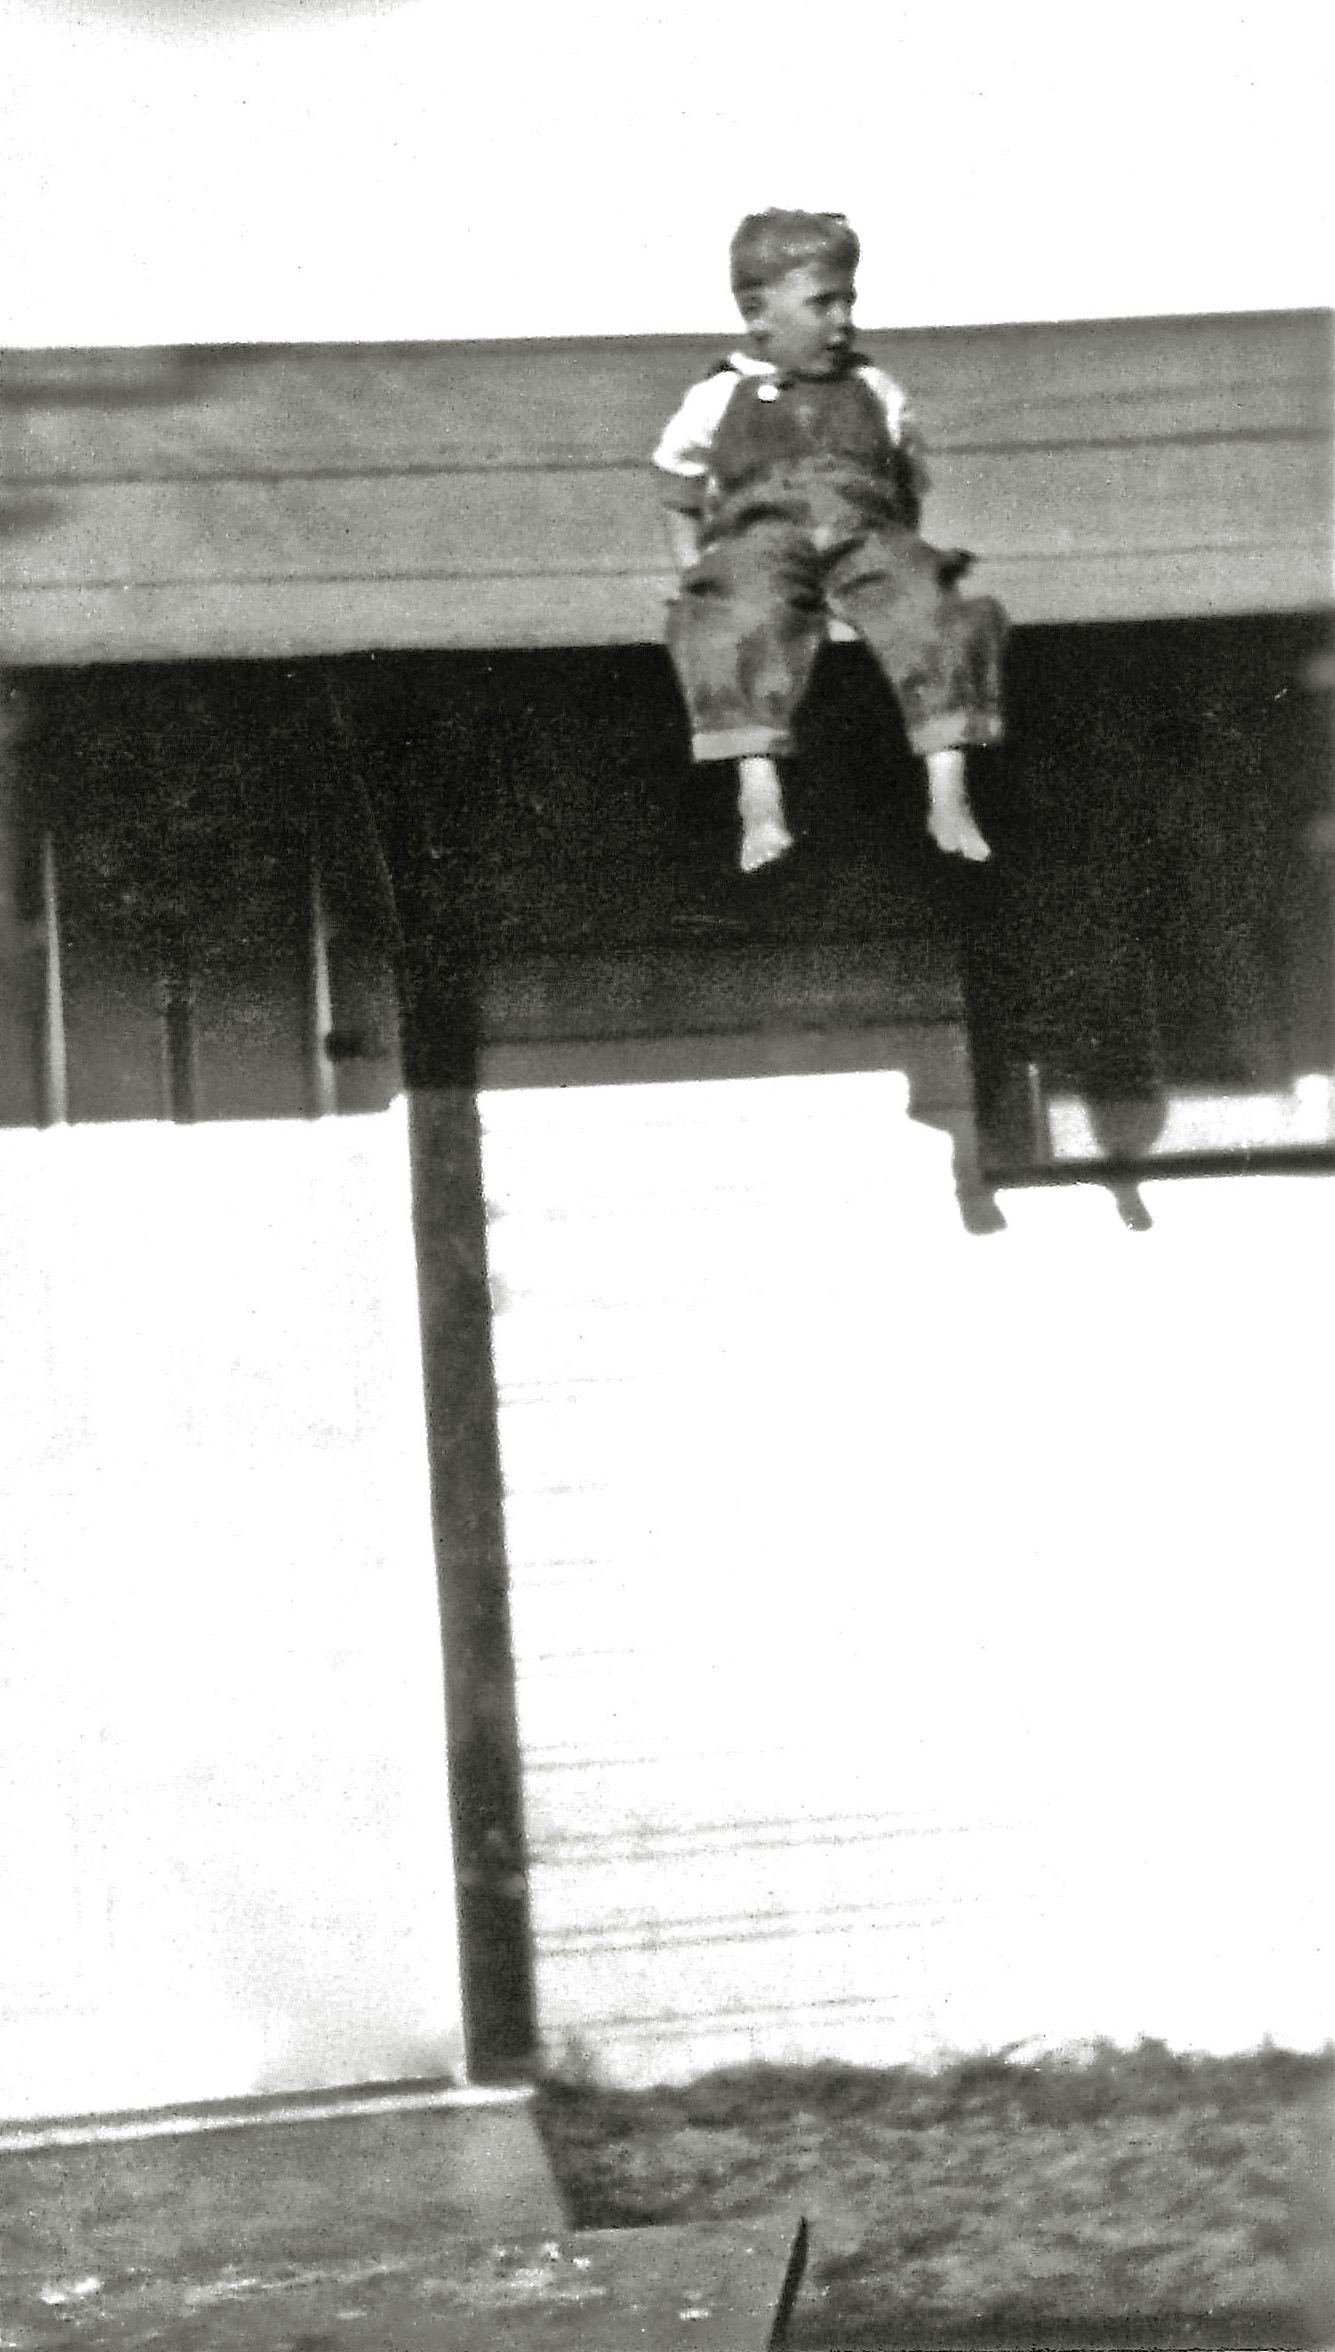 This is my dad, Allen Frederick Larsen, in 1930, when he was four. For some reason, we have a bunch of photos of him as a child in places that look quite dangerous: on rooftops as here, on railroad bridges, on car hoods. My grandfather took a lot of pictures. It's a wonder Dad lived to marry my mother. The picture was taken in Muscatine, Iowa.